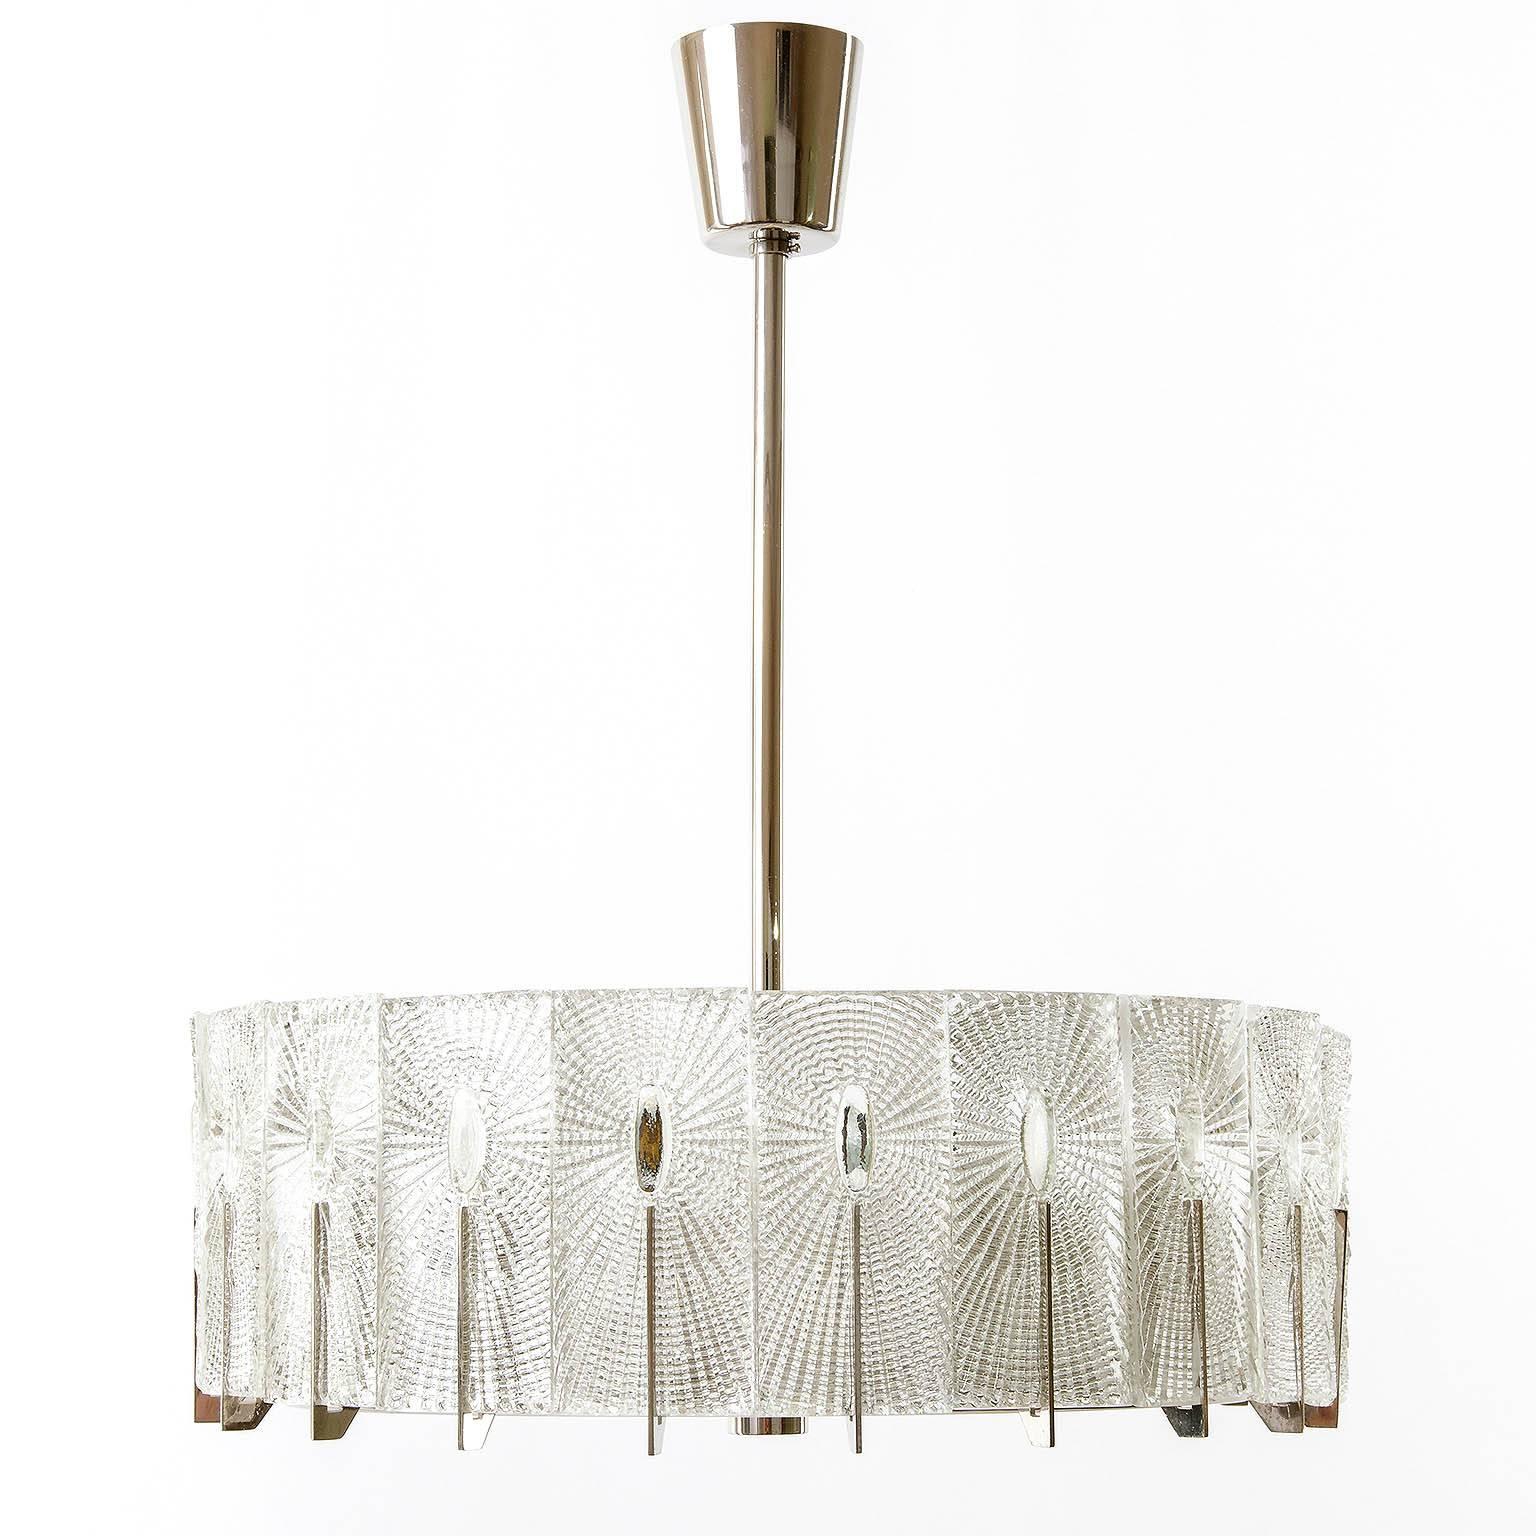 One of three beautiful textured glass and nickel (similar to chrome) light fixtures by Rupert Nikoll, Austria, manufactured in midcentury, circa 1960 (late 1950s or early 1960s). The glass structure is in the style of the lights from J.T. Kalmar or